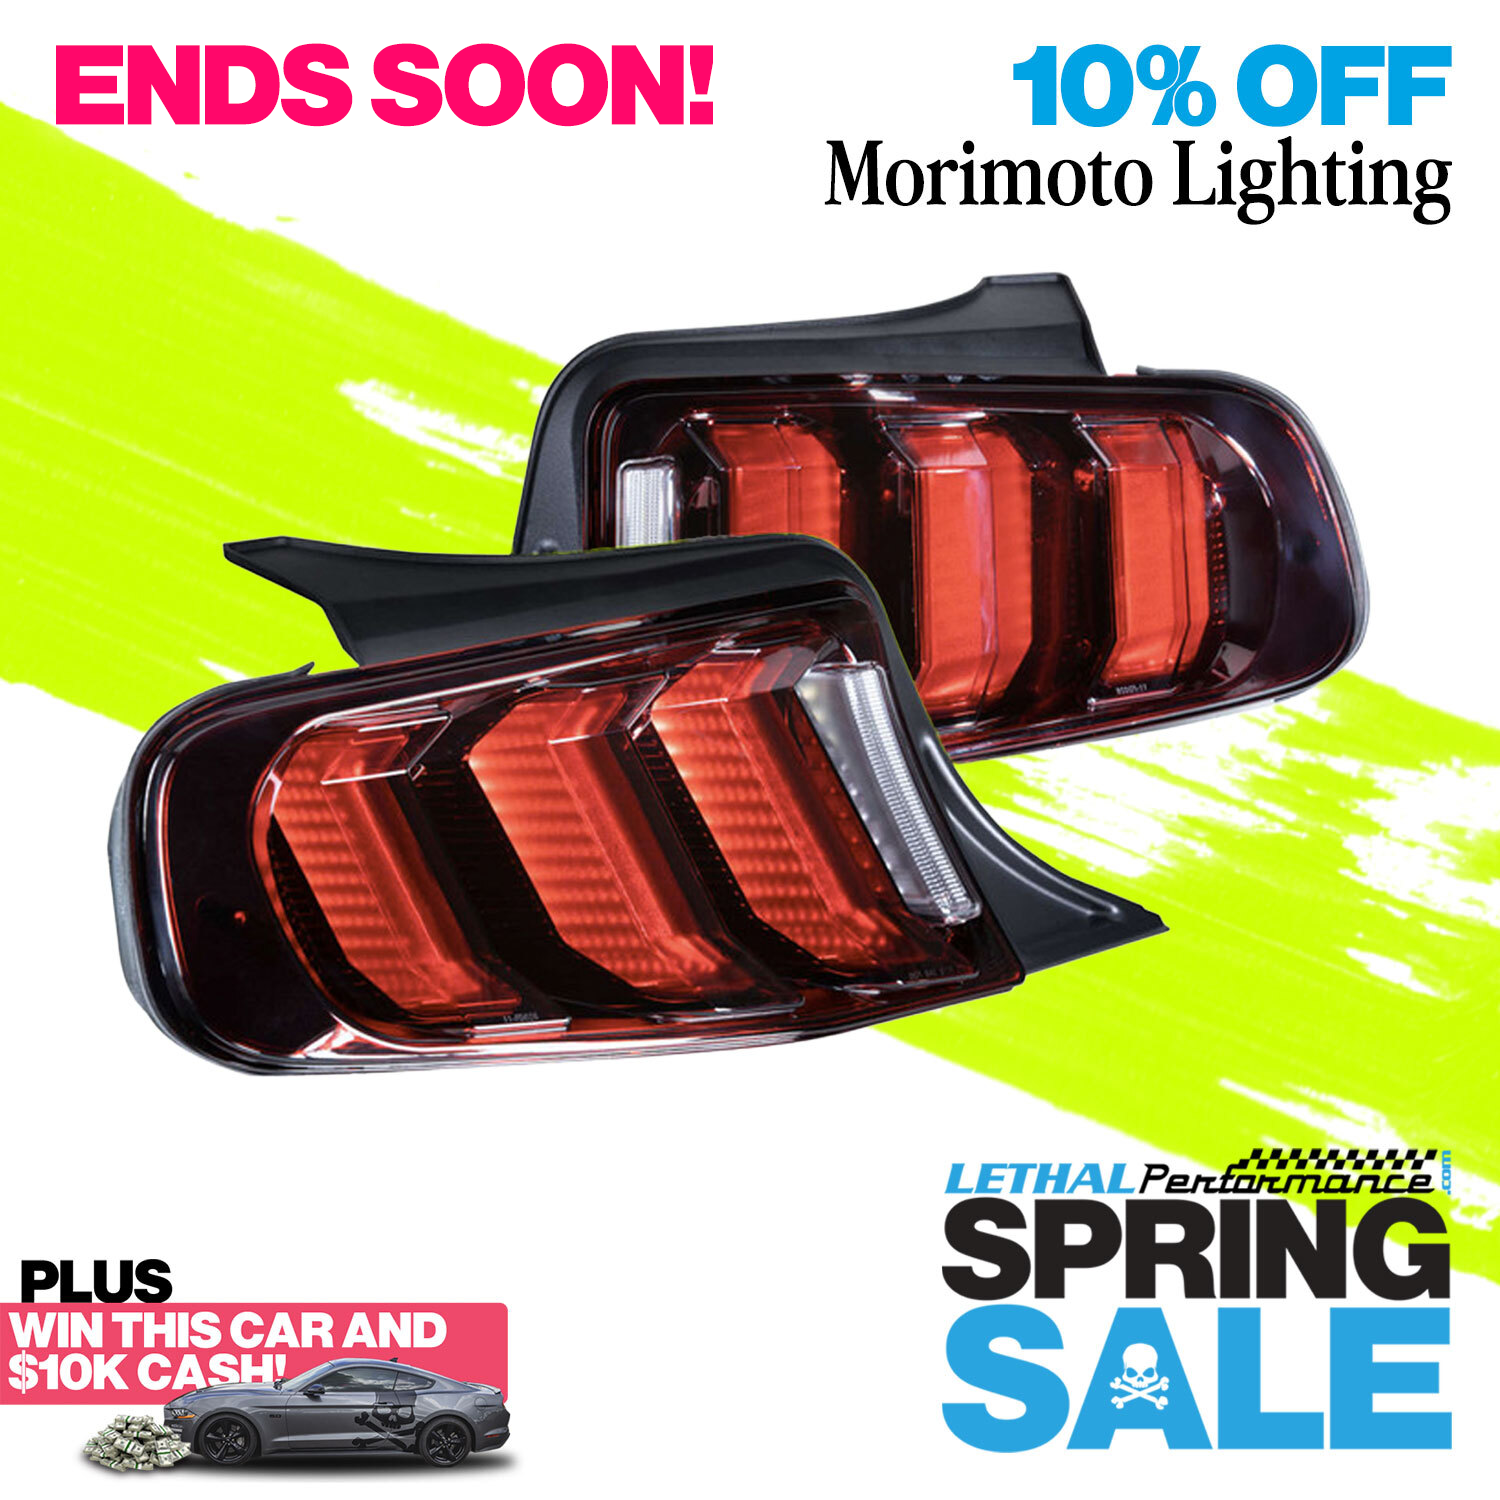 S650 Mustang Spring SALE has SPRUNG here at Lethal Performance!! mori msuatng end soon spring sale